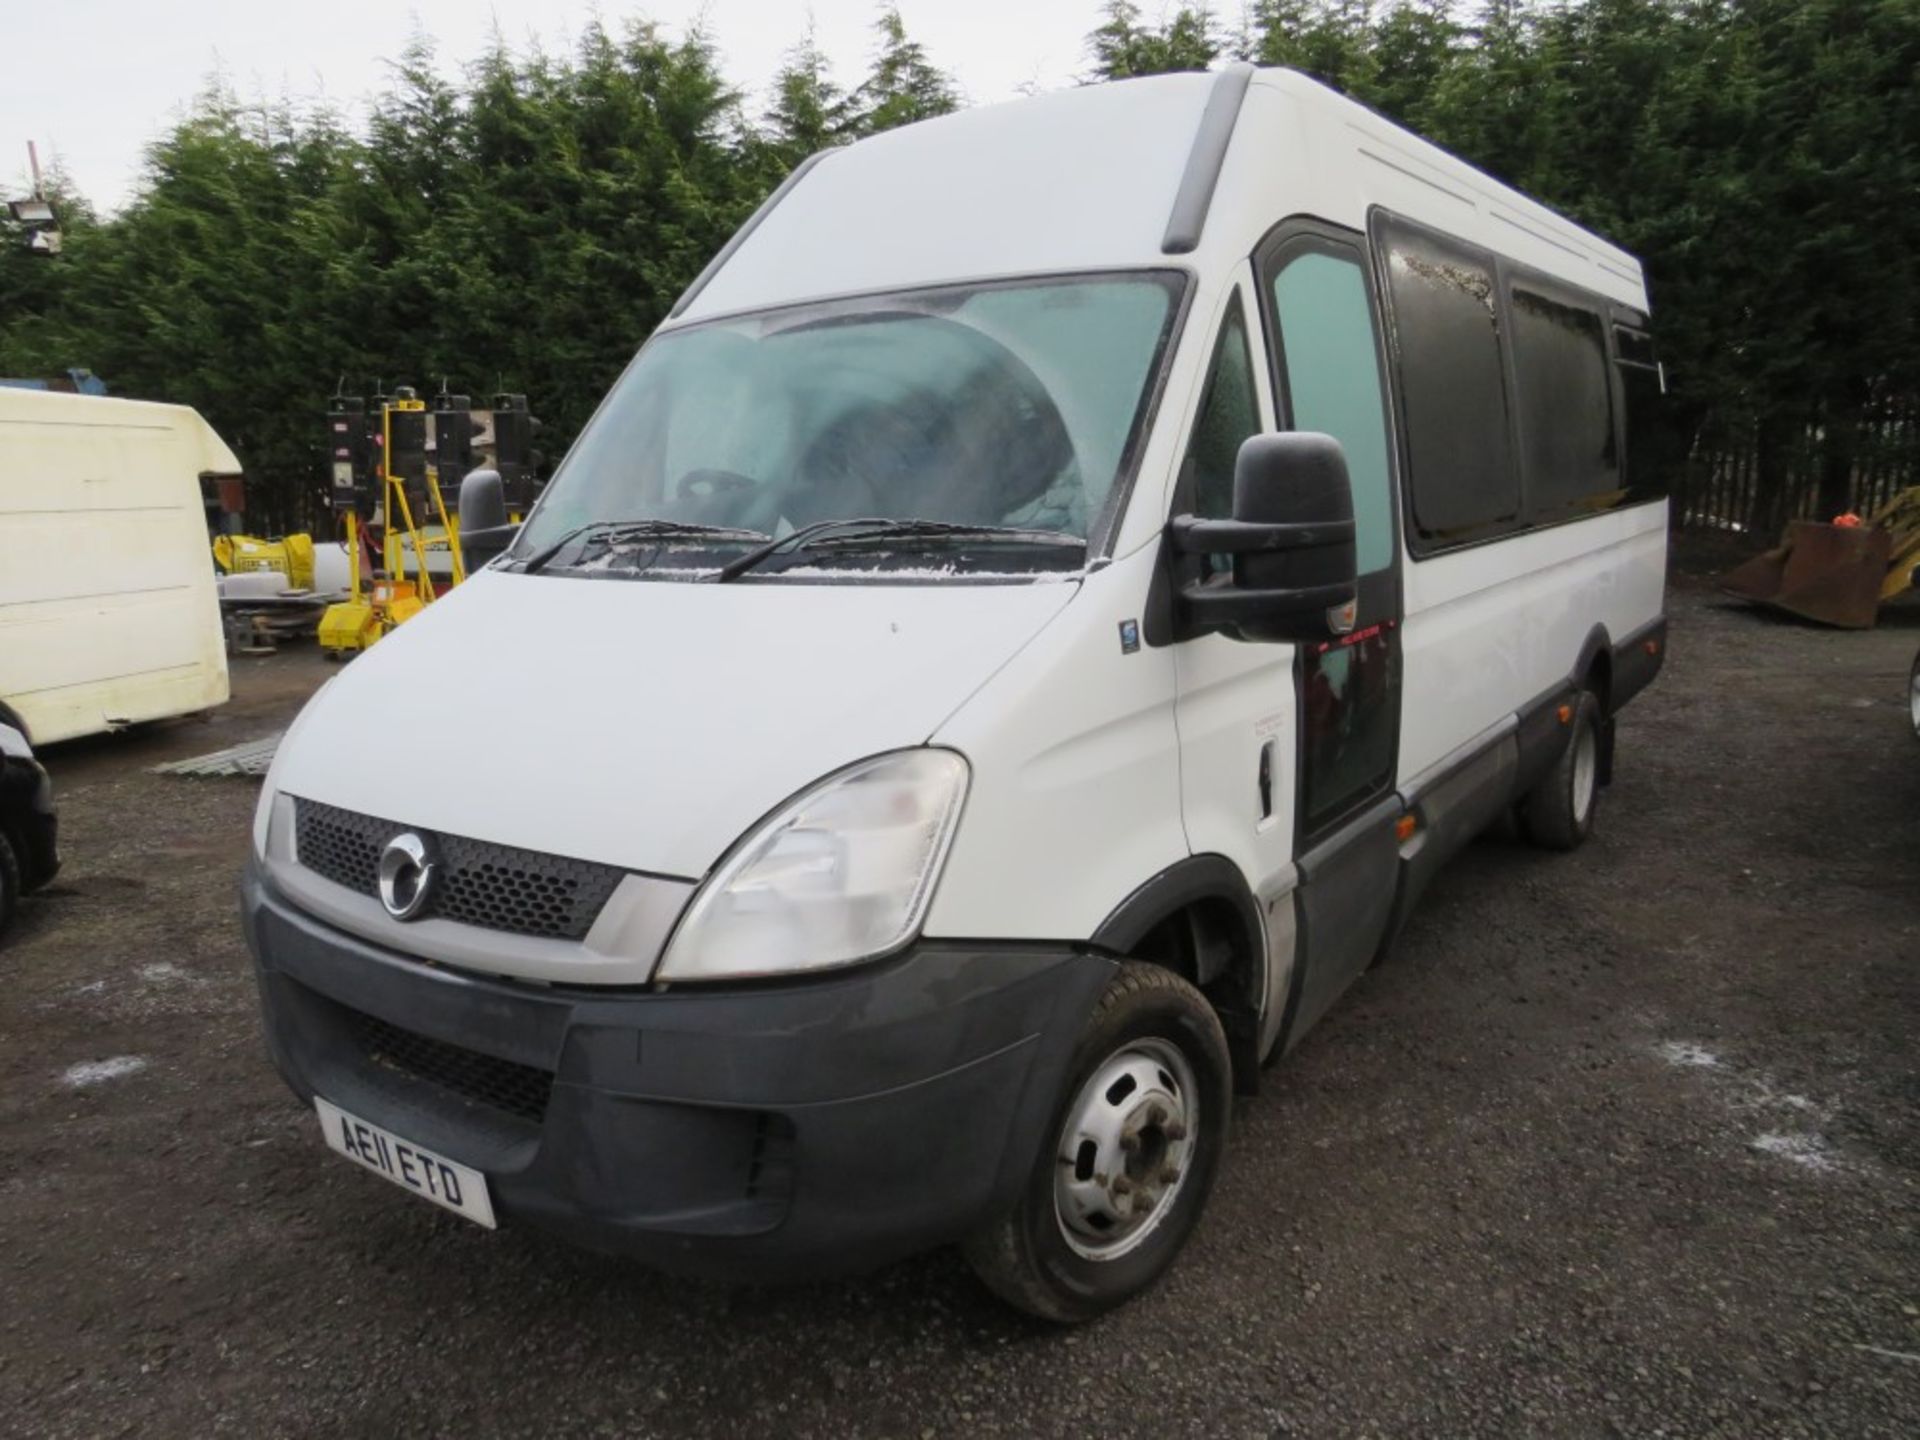 11 reg IVECO DAILY 50C17 IRIS BUS, 1ST REG 04/11, 74493M WARRANTED, WHEEL CHAIR LIFT, V5 HERE, 1 - Image 2 of 7